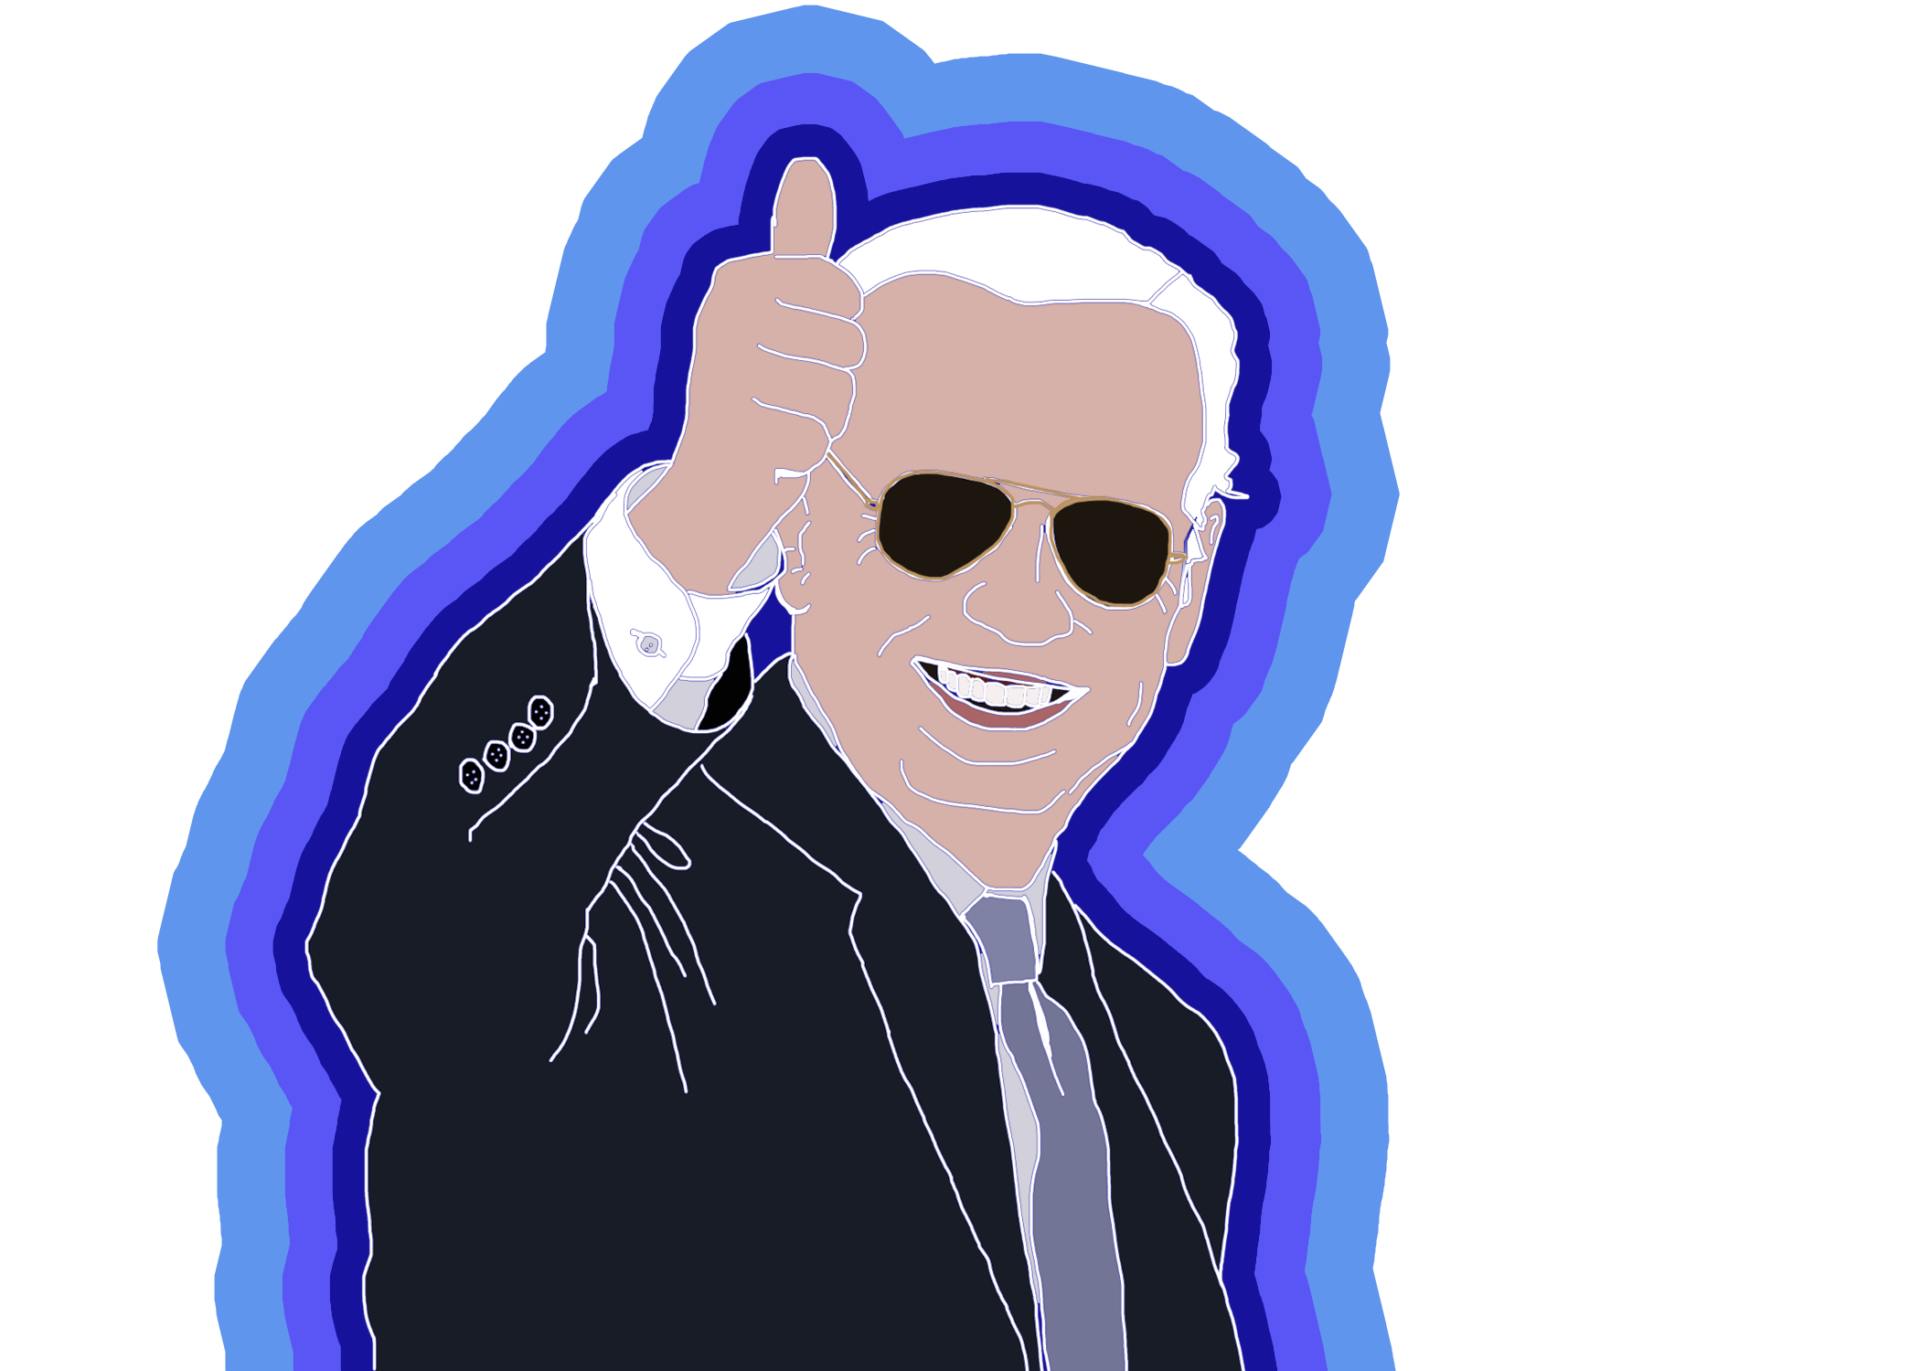 Illustration of Joe Biden wearing aviator sunglasses and a suit. Biden is smiling and giving a thumbs-up.